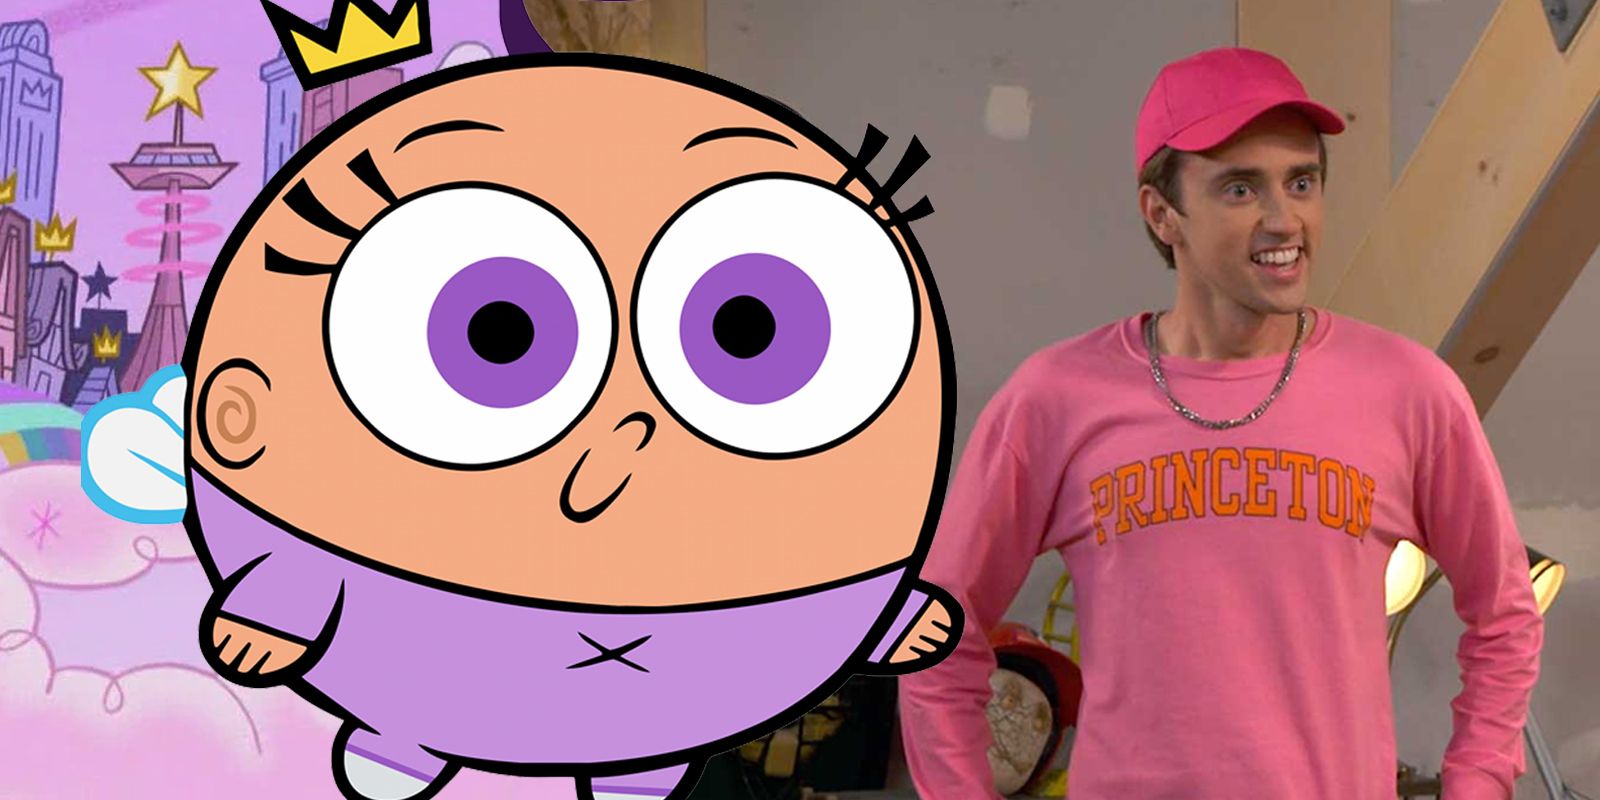 Poof from Fairly OddParents with Timmy Turner from Fairly Odder.